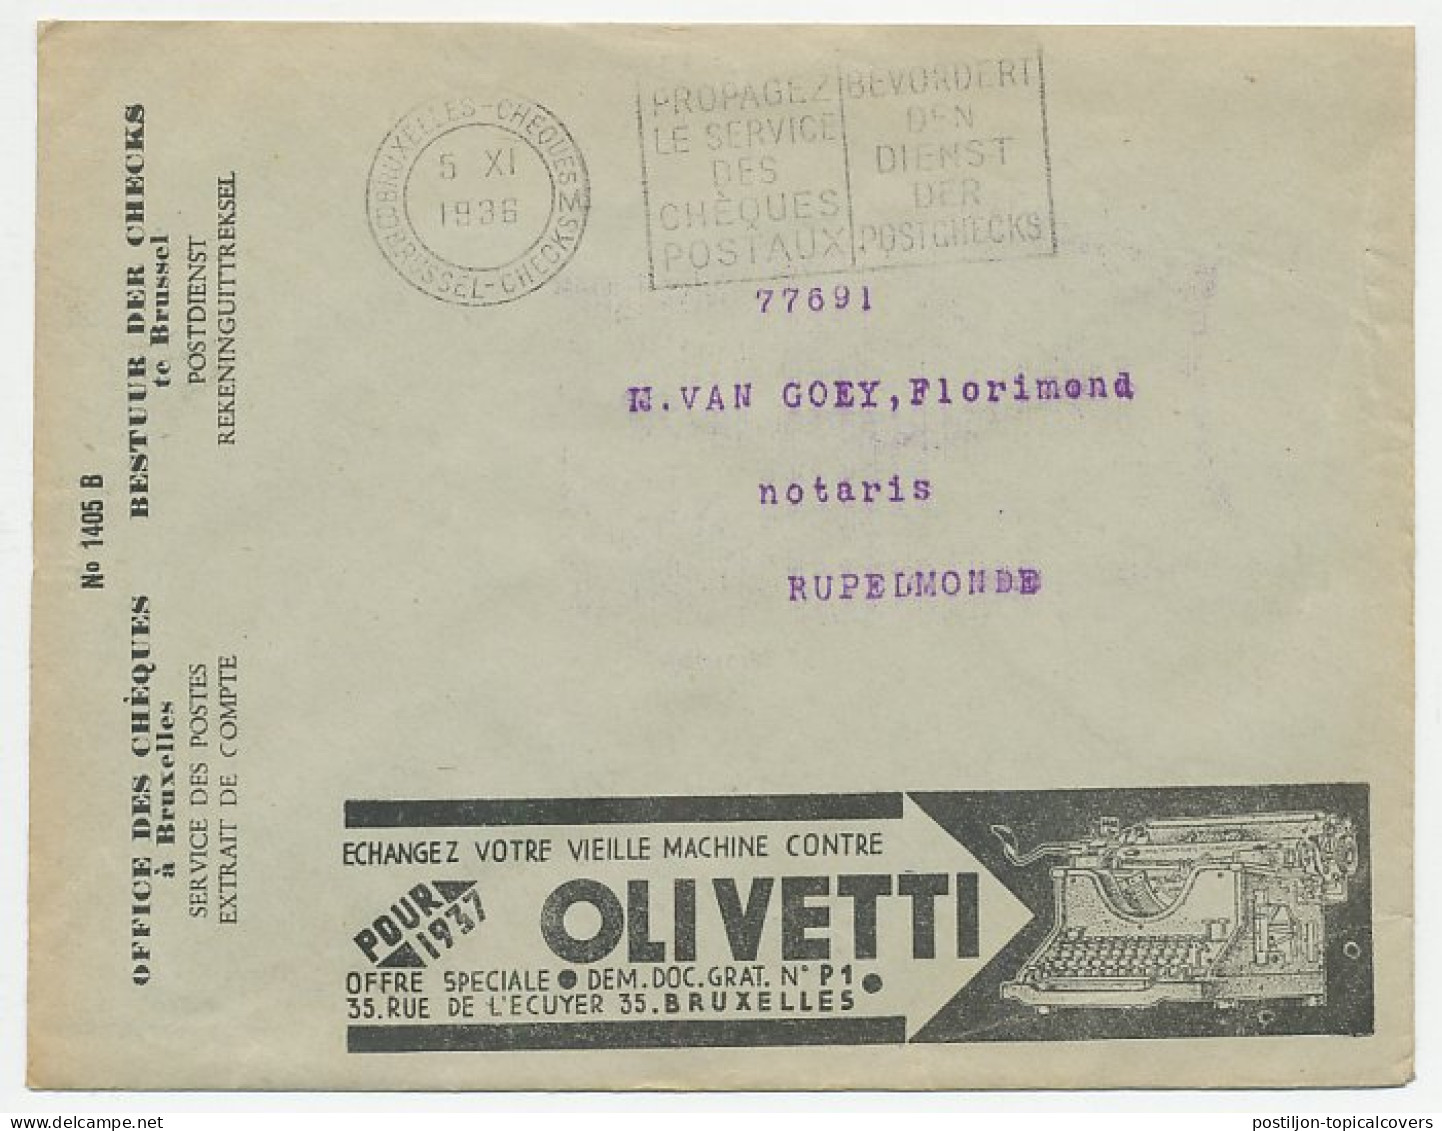 Postal Cheque Cover Belgium 1936 Deaf - Tobacco - Comb - Pearlescent - Typewriter - Olivetti - Behinderungen